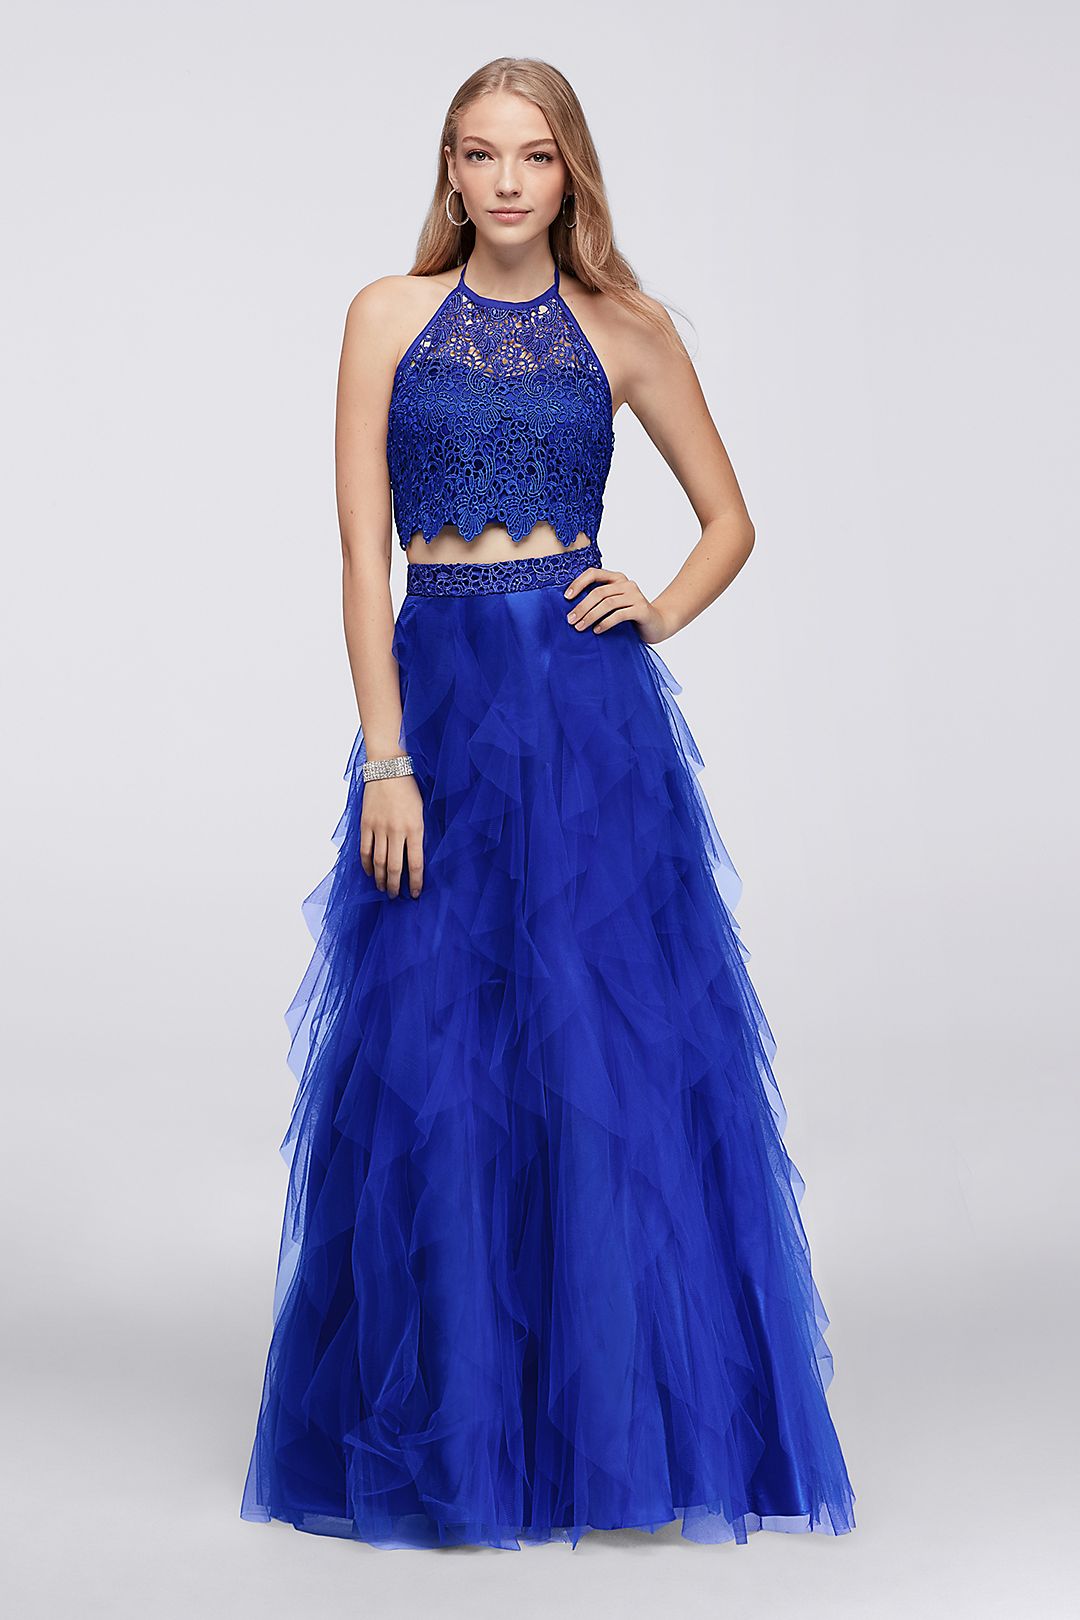 Lace Crop Top and Ruffled Tulle Two-Piece Dress Image 1